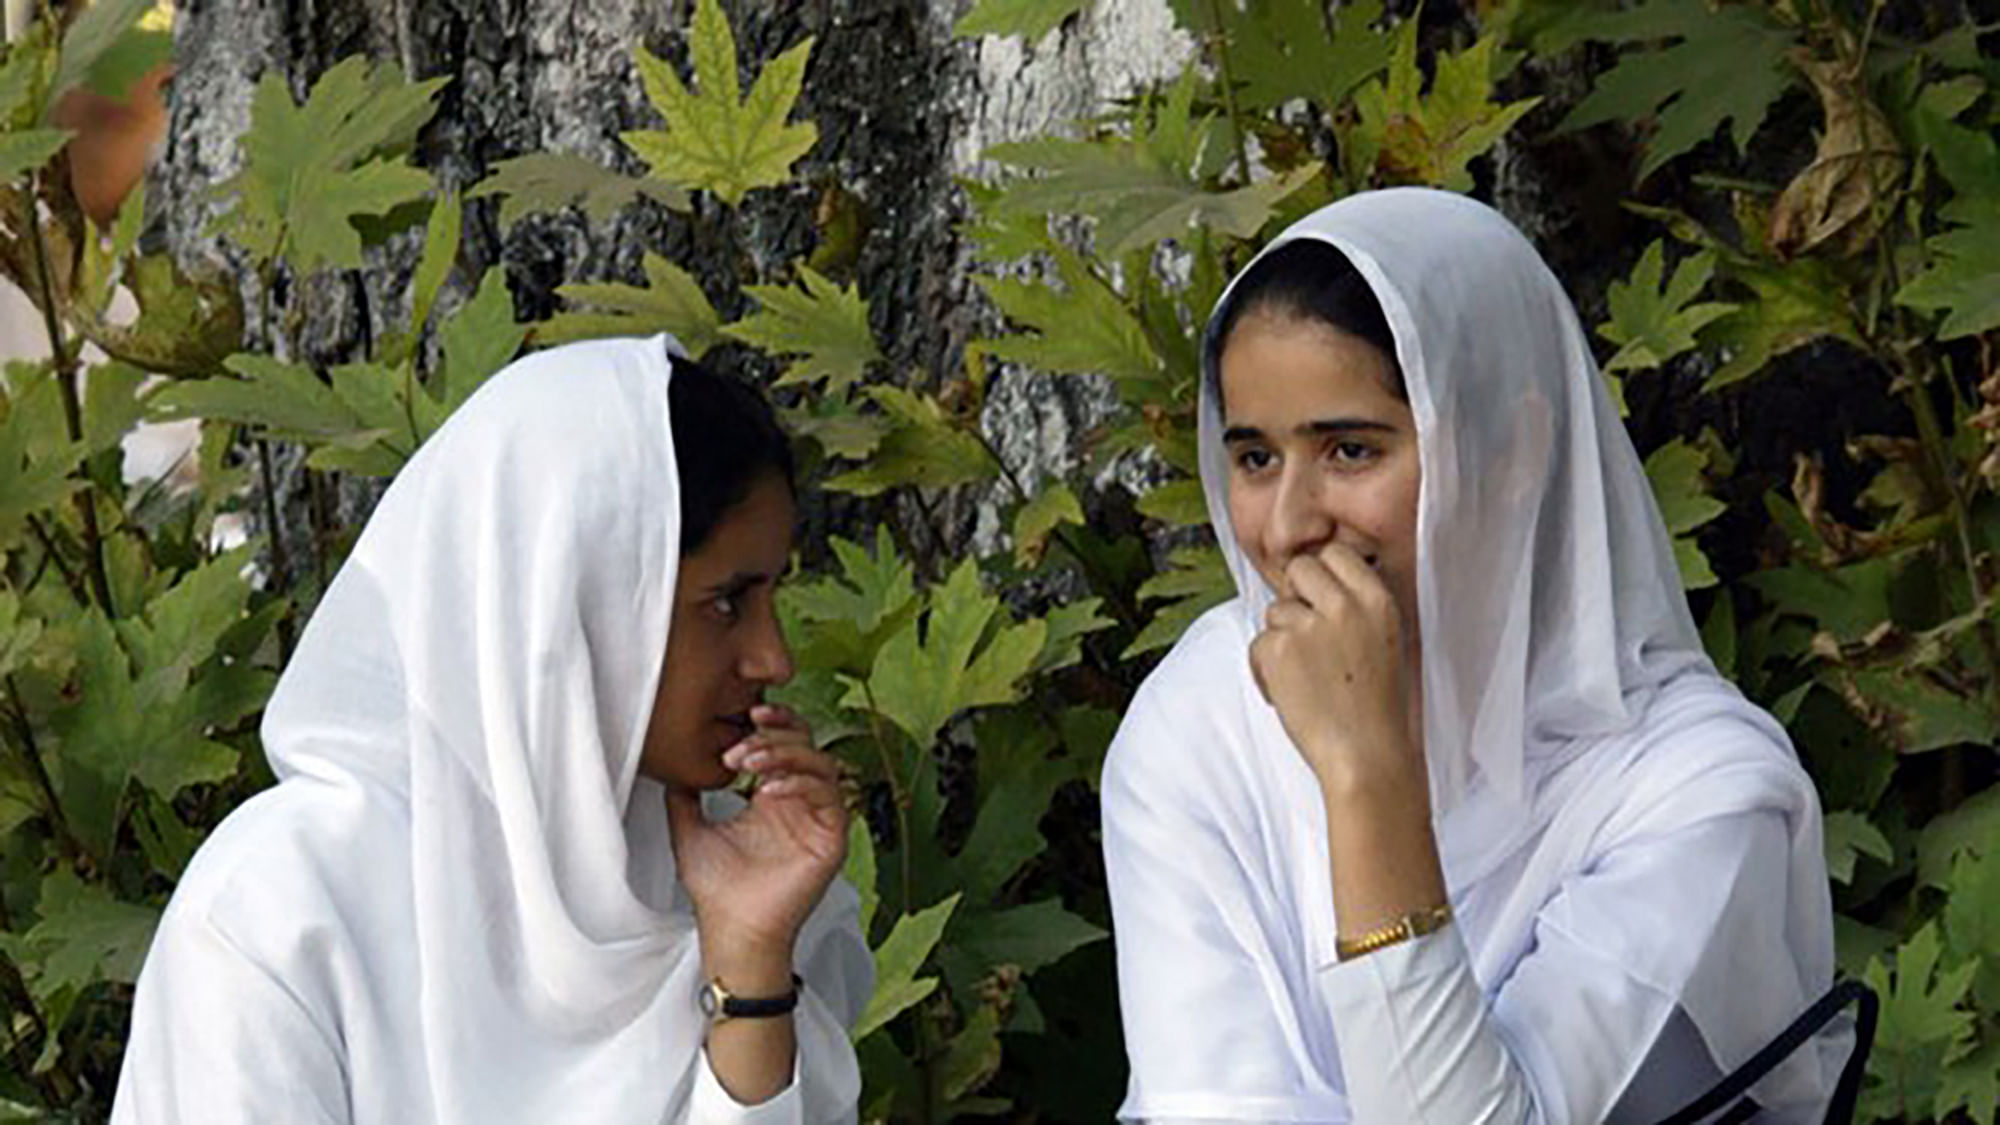 Representational image of college going students in Srinagar, Kashmir. (Photo : Reuters)